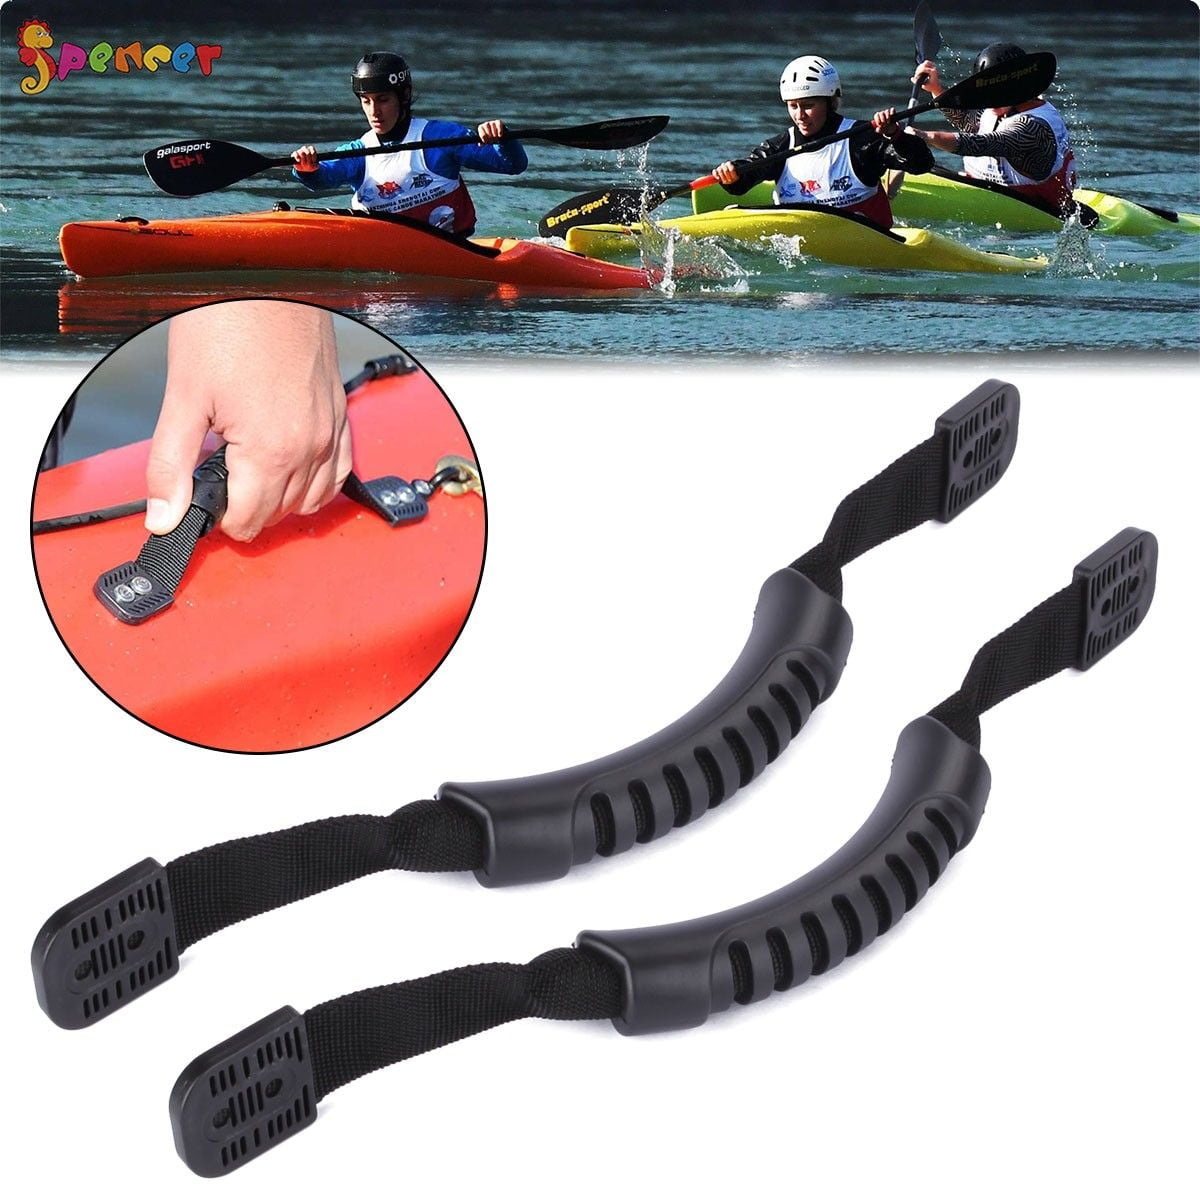 1Pair Rubber Boat Luggage Side Mount Carry Handles Kayak Canoe Boat Accessories 